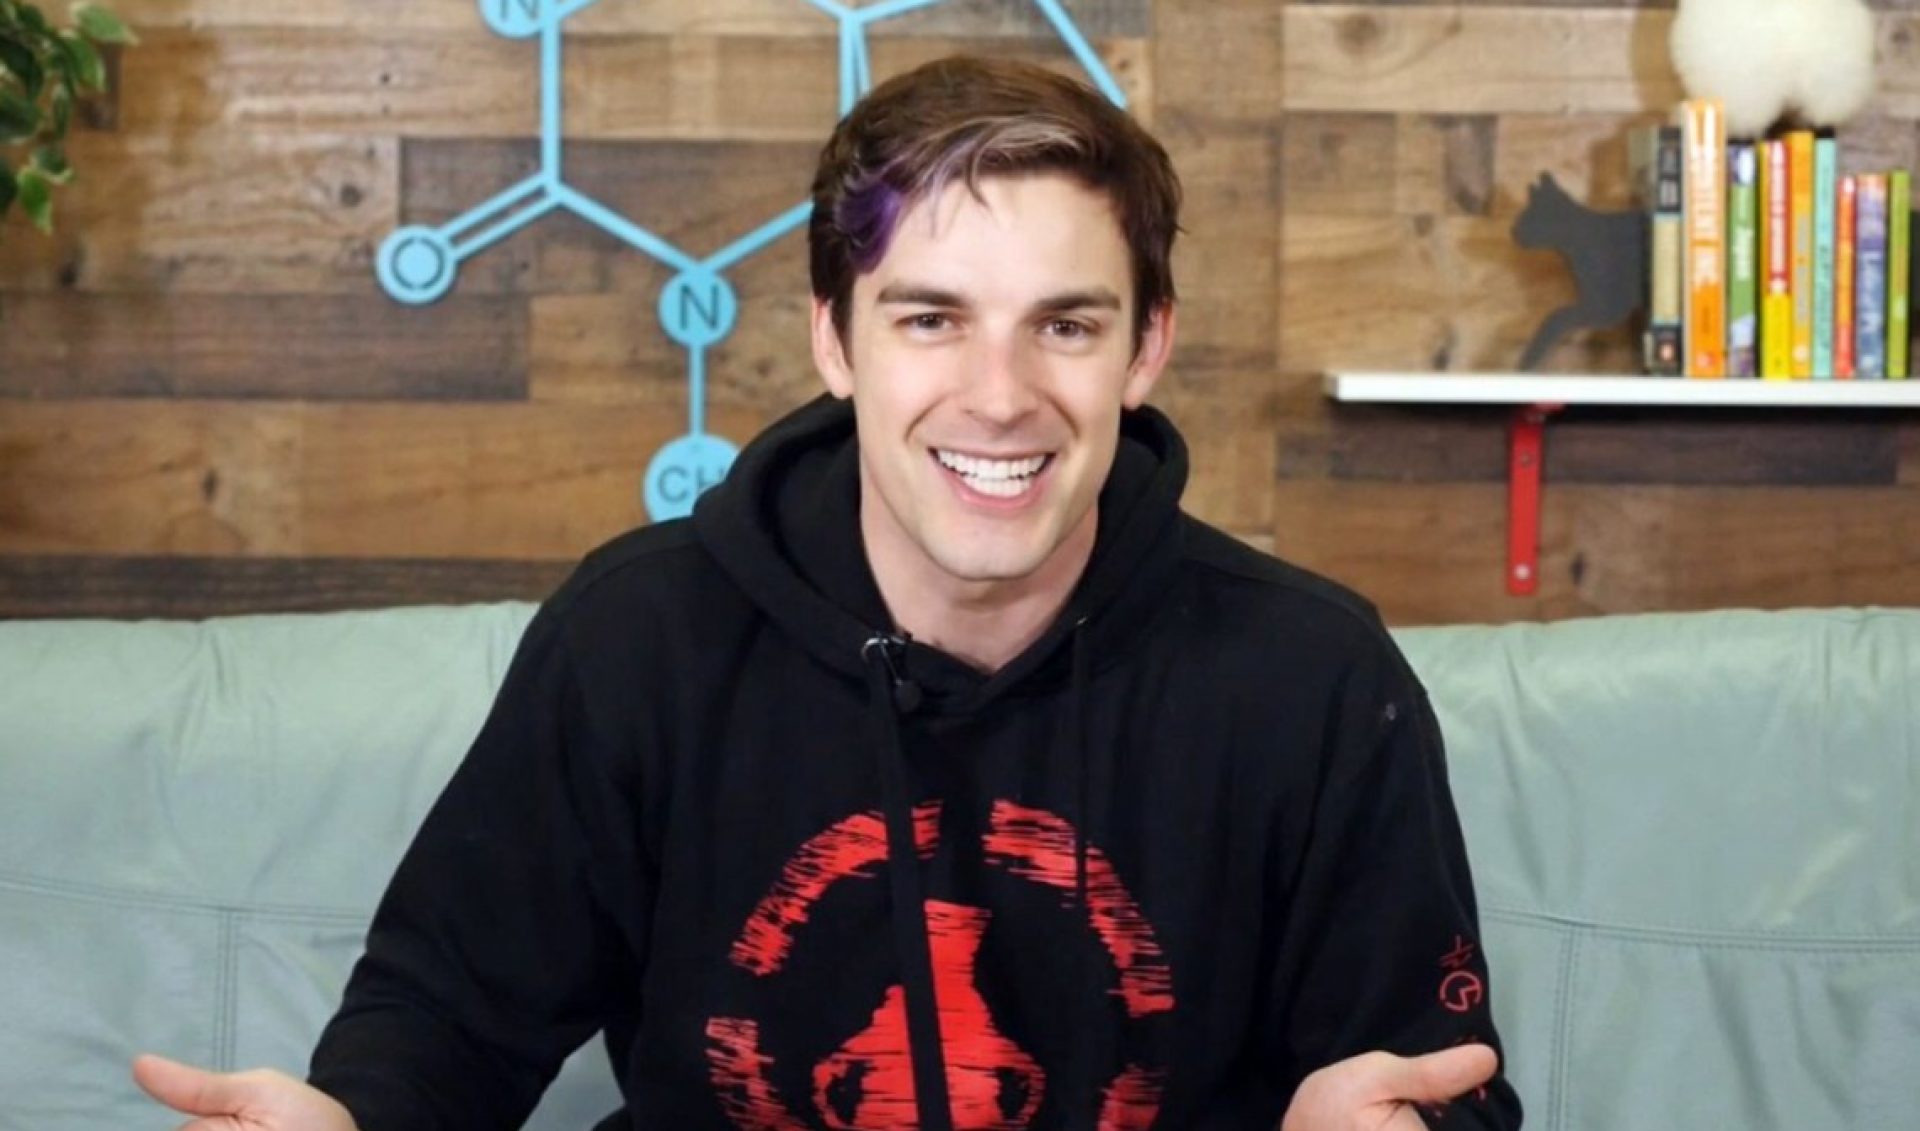 MatPat’s Alternate Reality Game ‘The Theorist Gateway’ Has Amassed 400,000 Unique Players